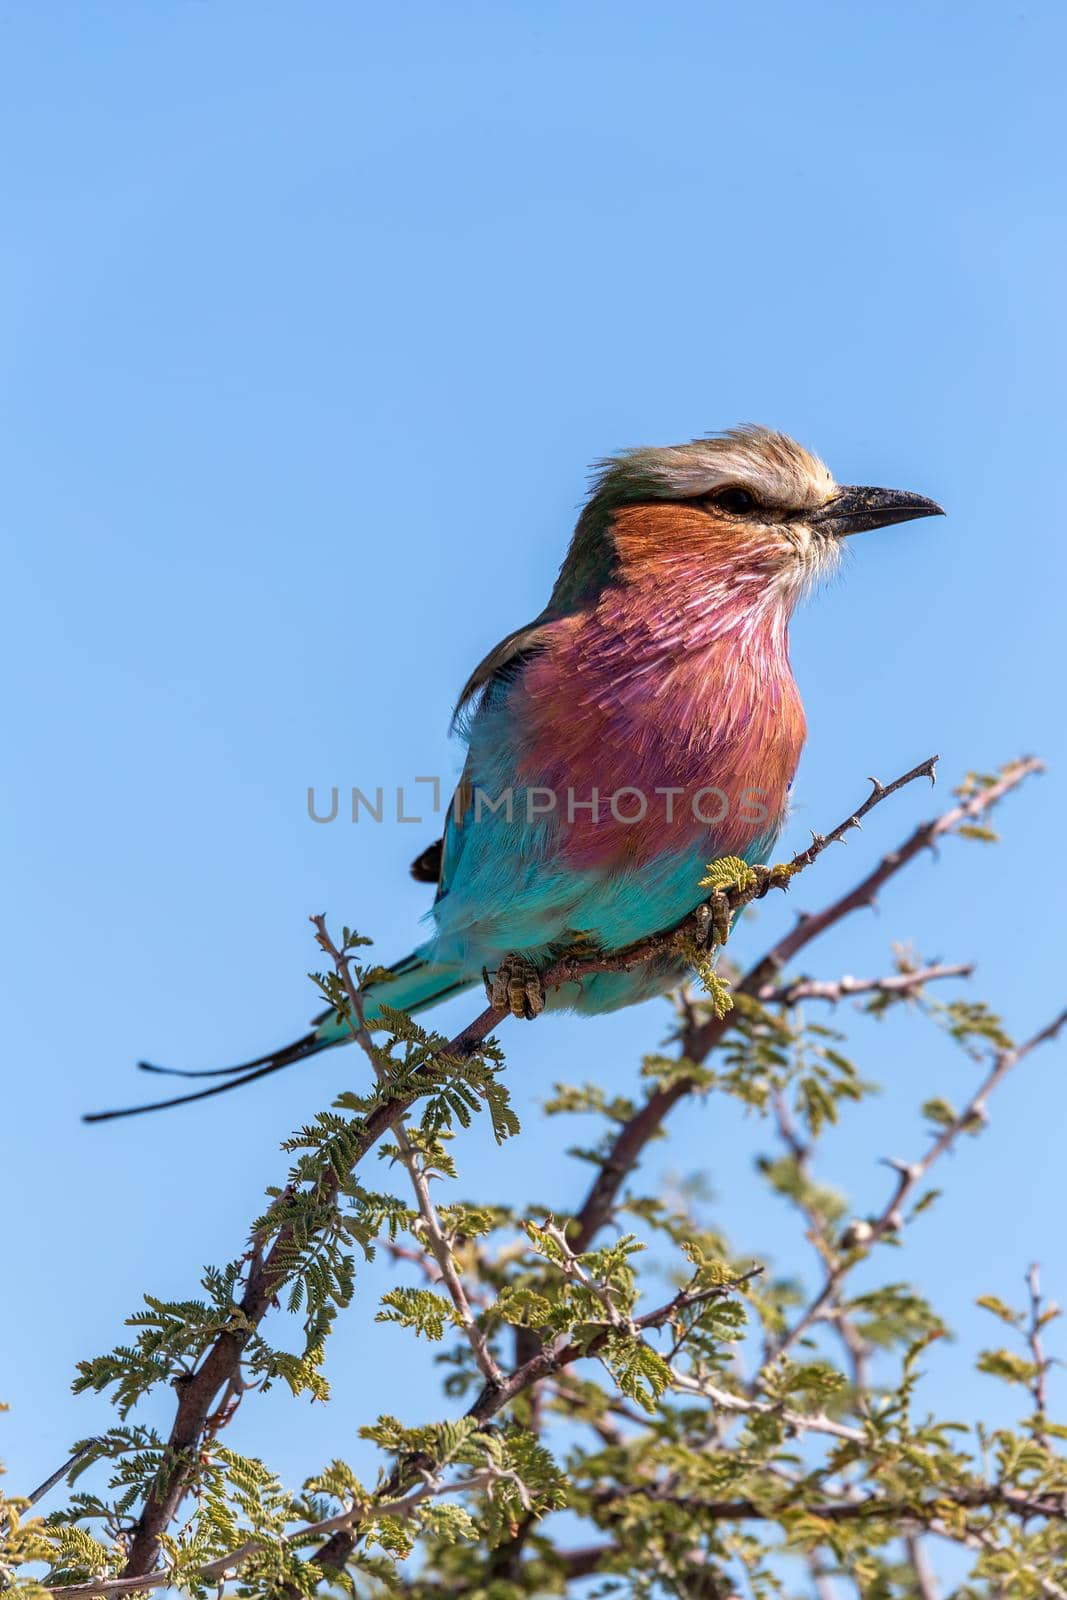 Lilac-brested roller, africa safari wildlife by artush